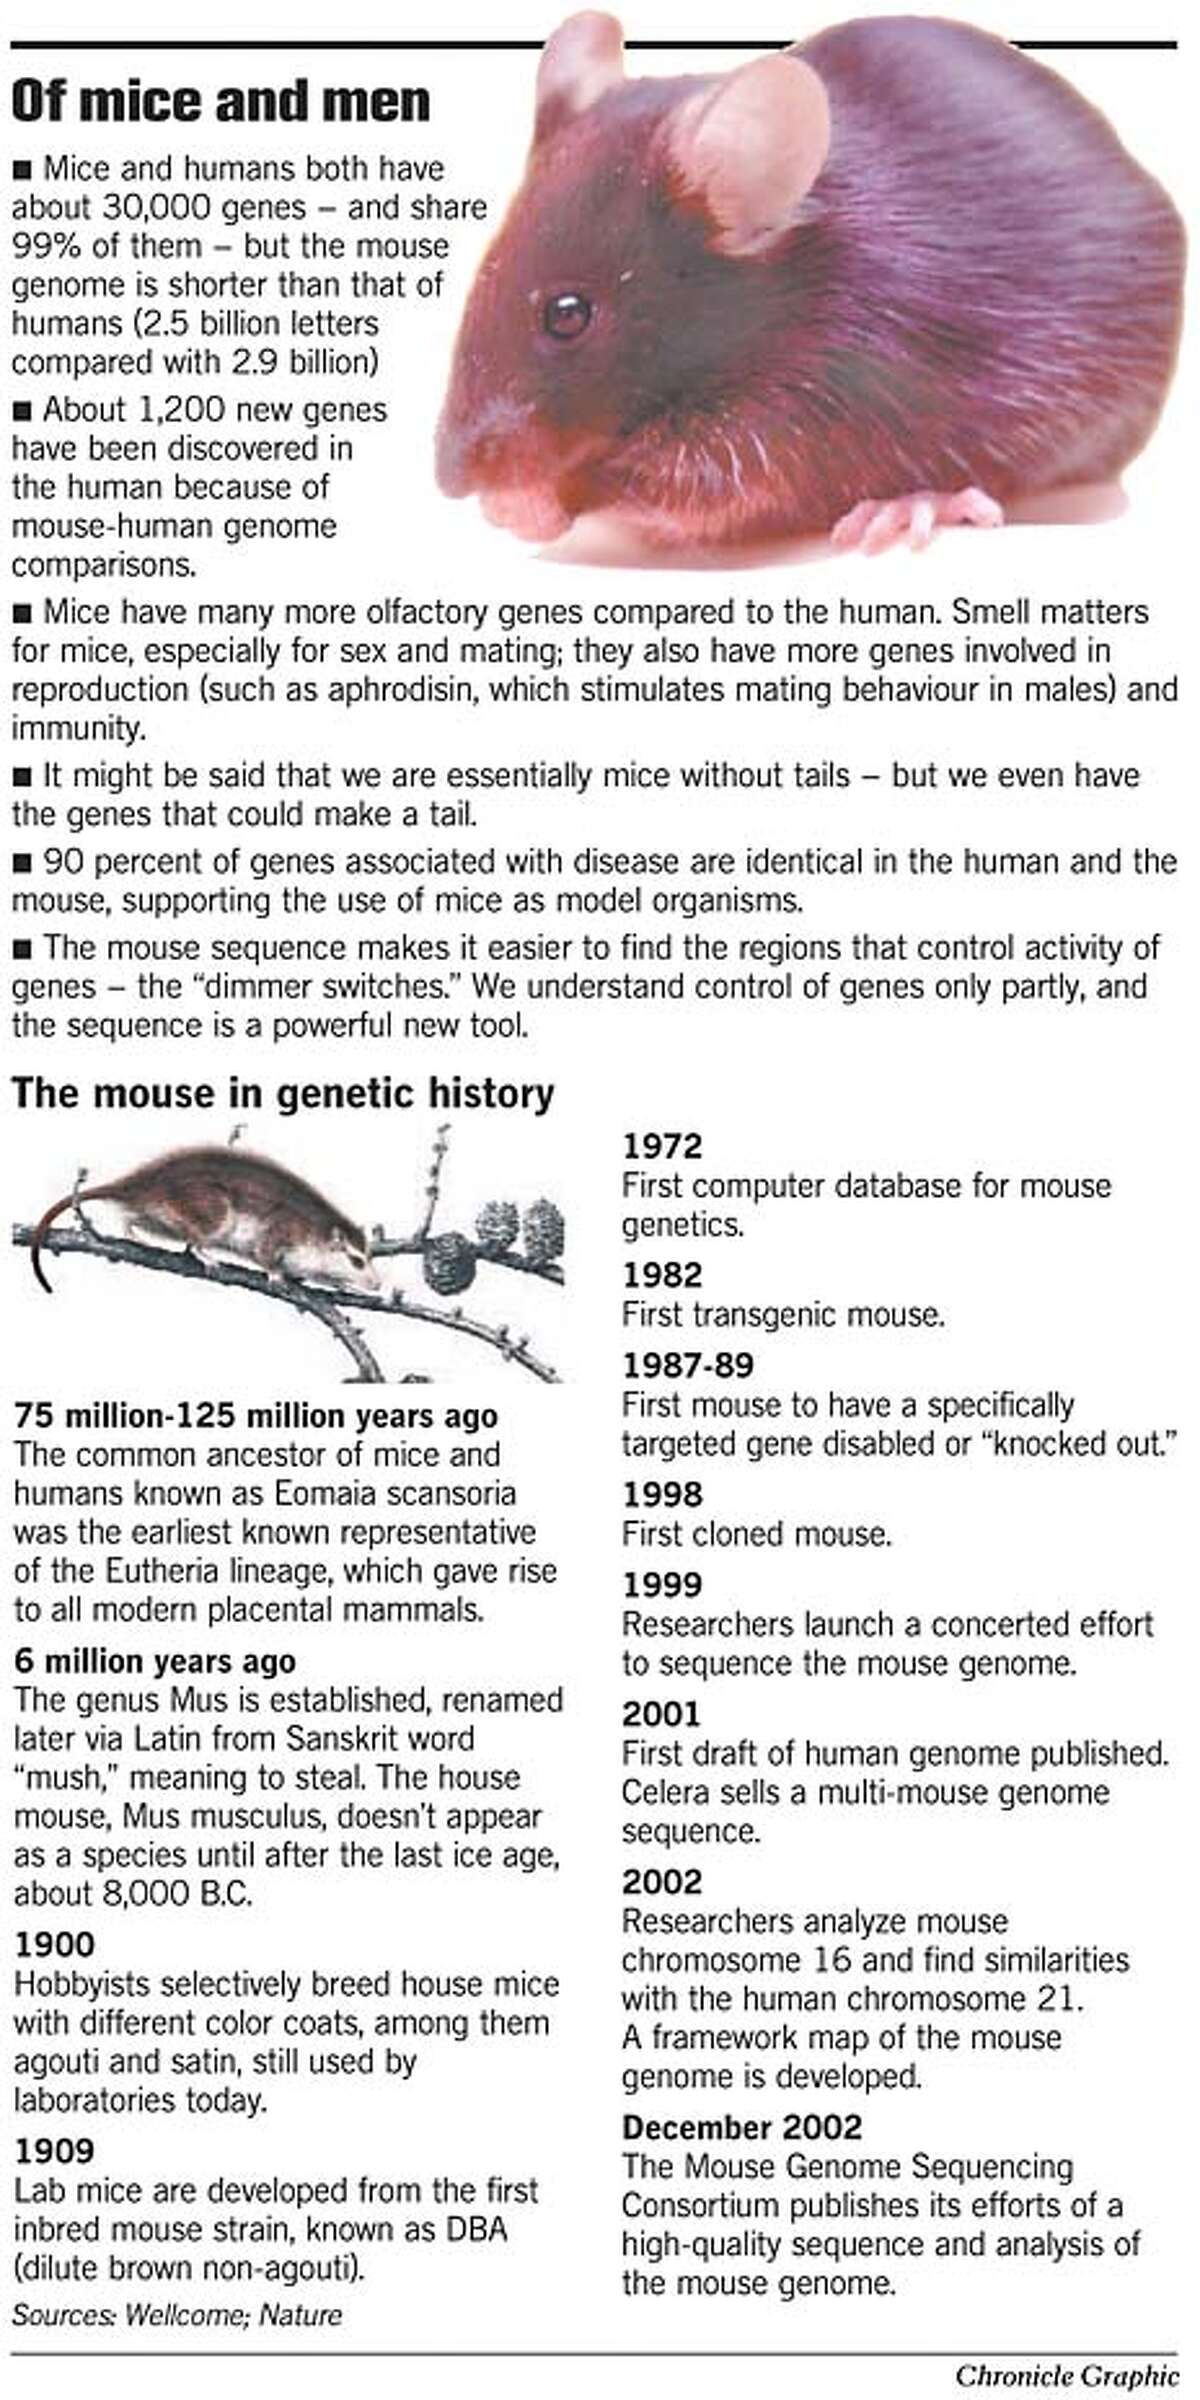 Man vs. Mouse. Chronicle Graphic